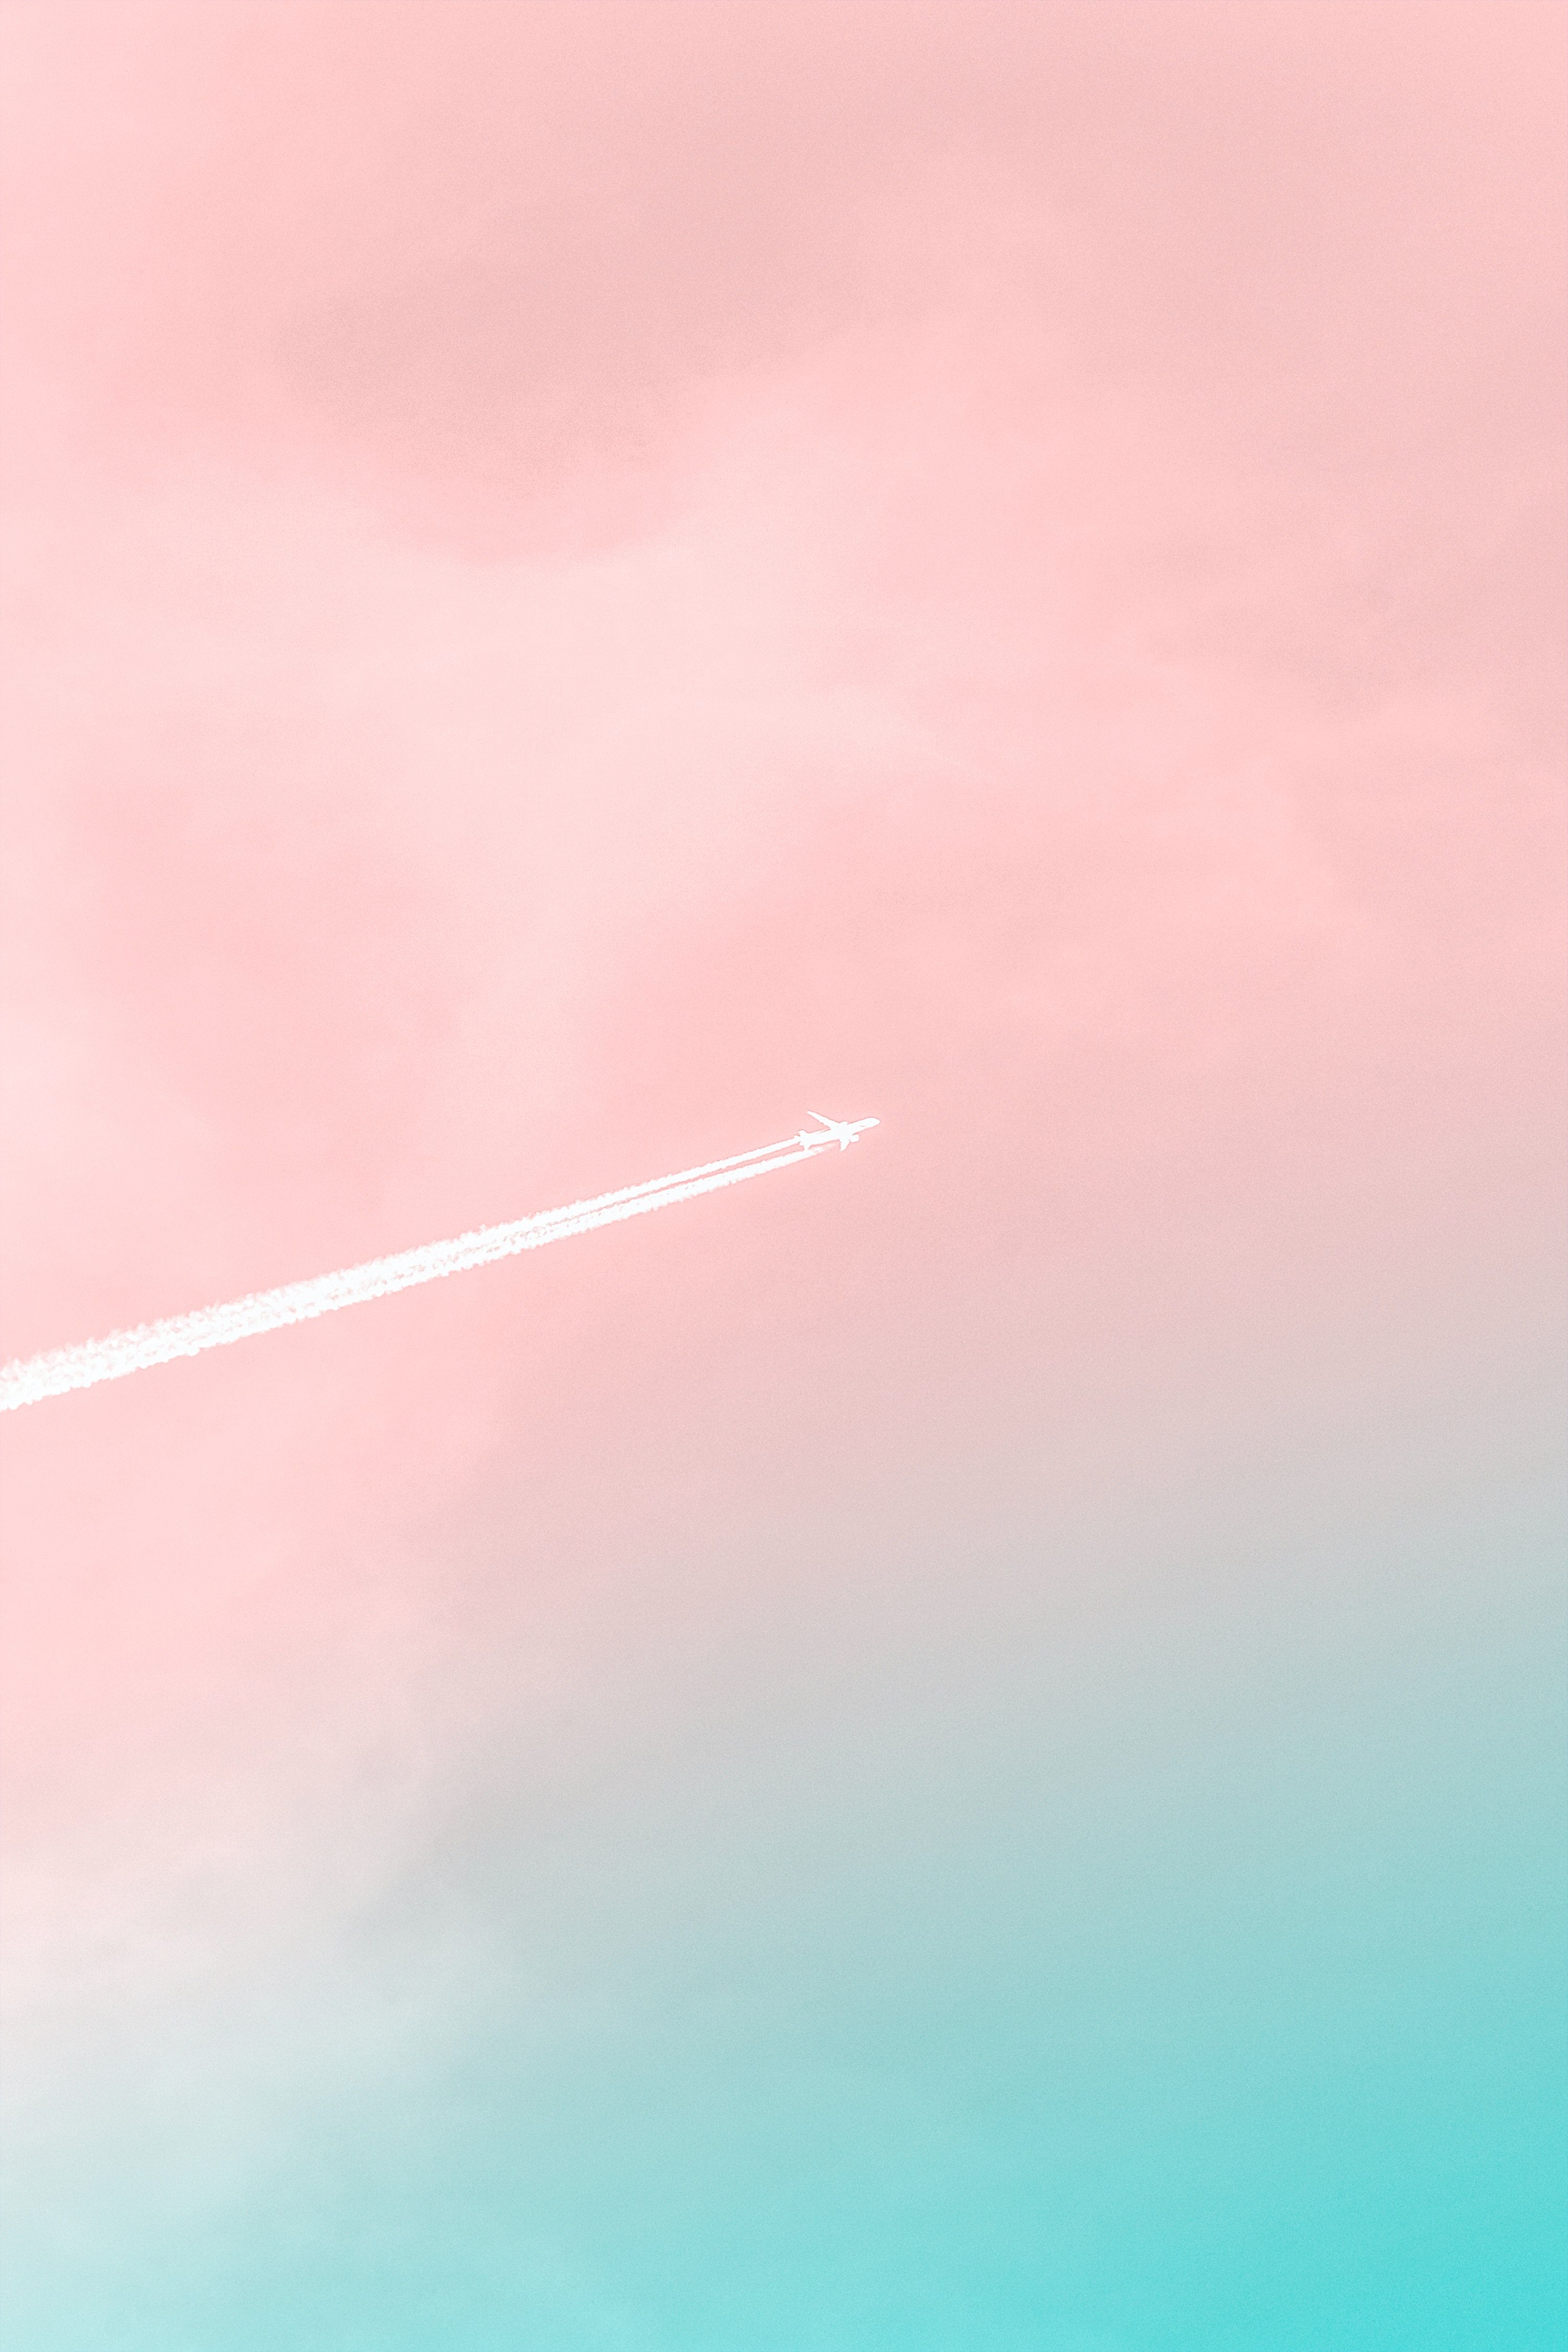 A plane flying through the sky with a white trail of smoke behind it - Pastel minimalist